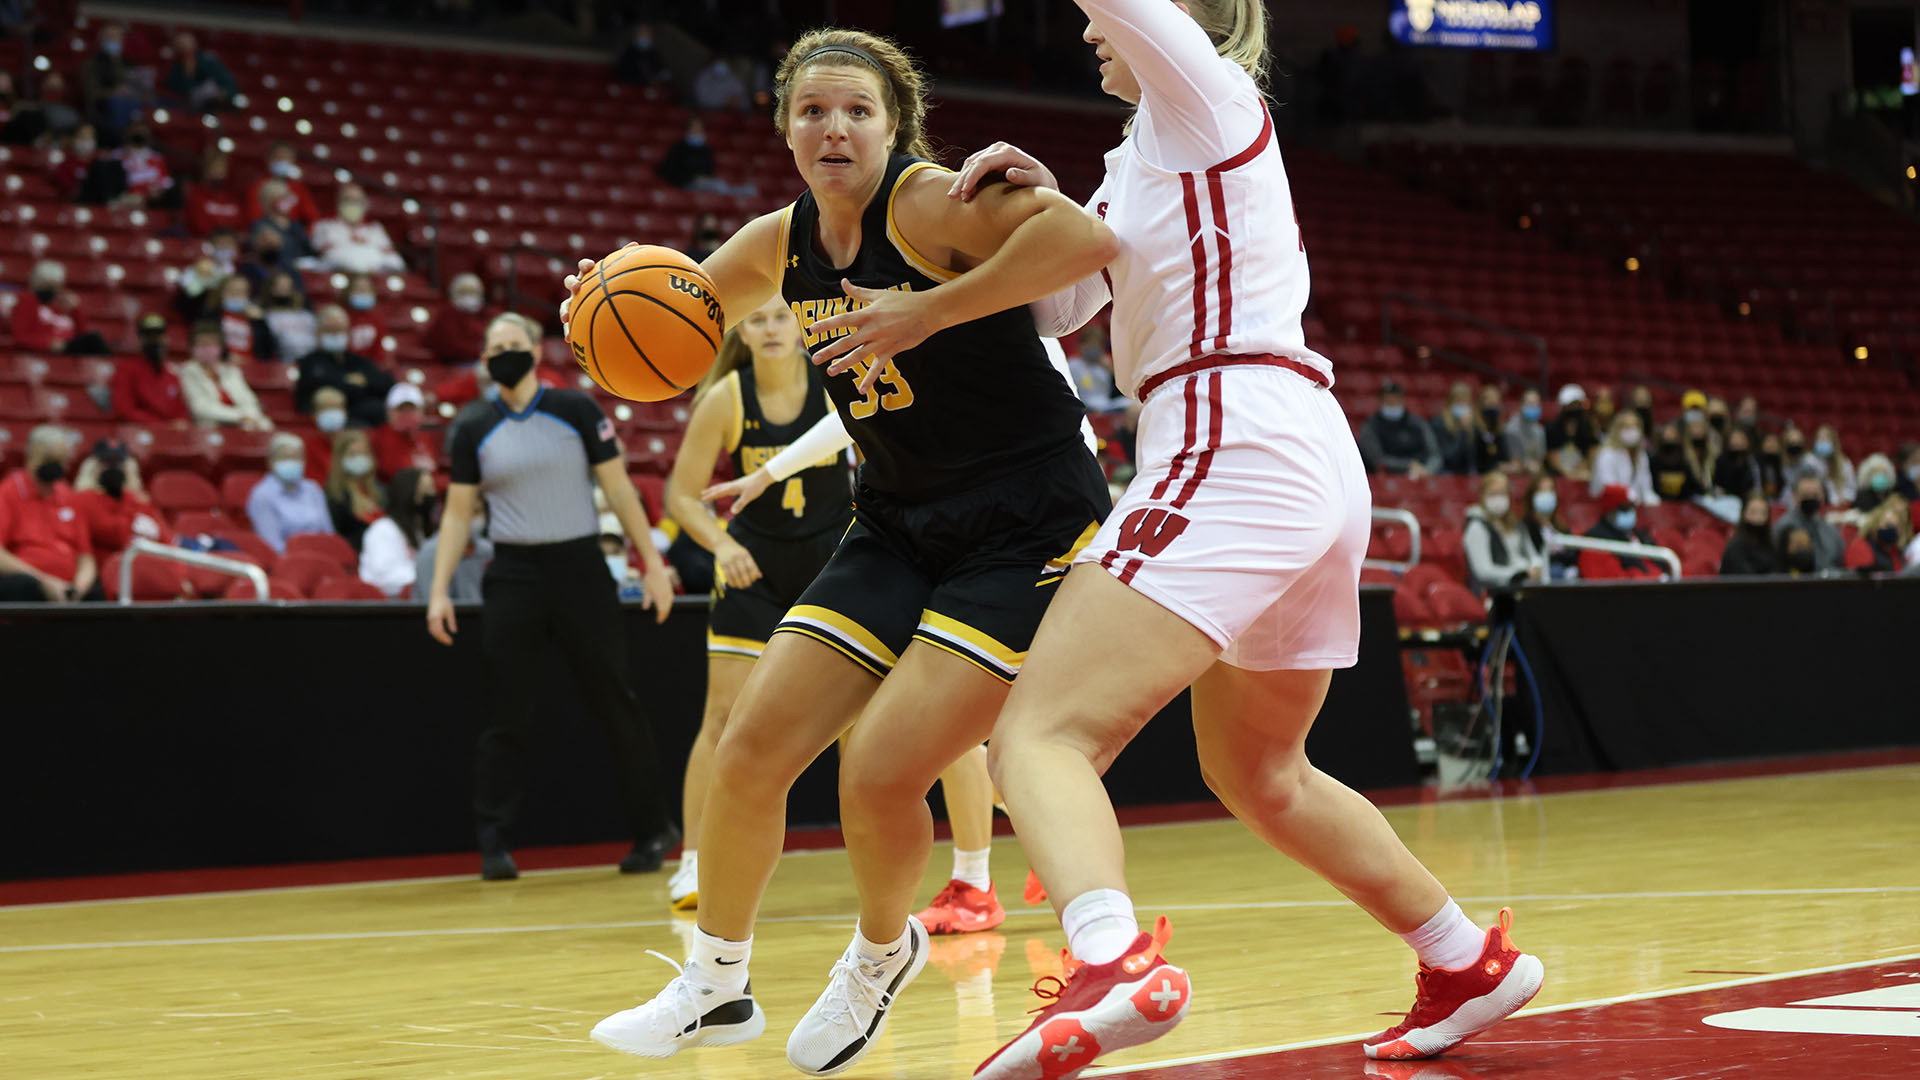 Nikki Arneson scored 13 of her team-leading 16 points against the Lions in the second half.